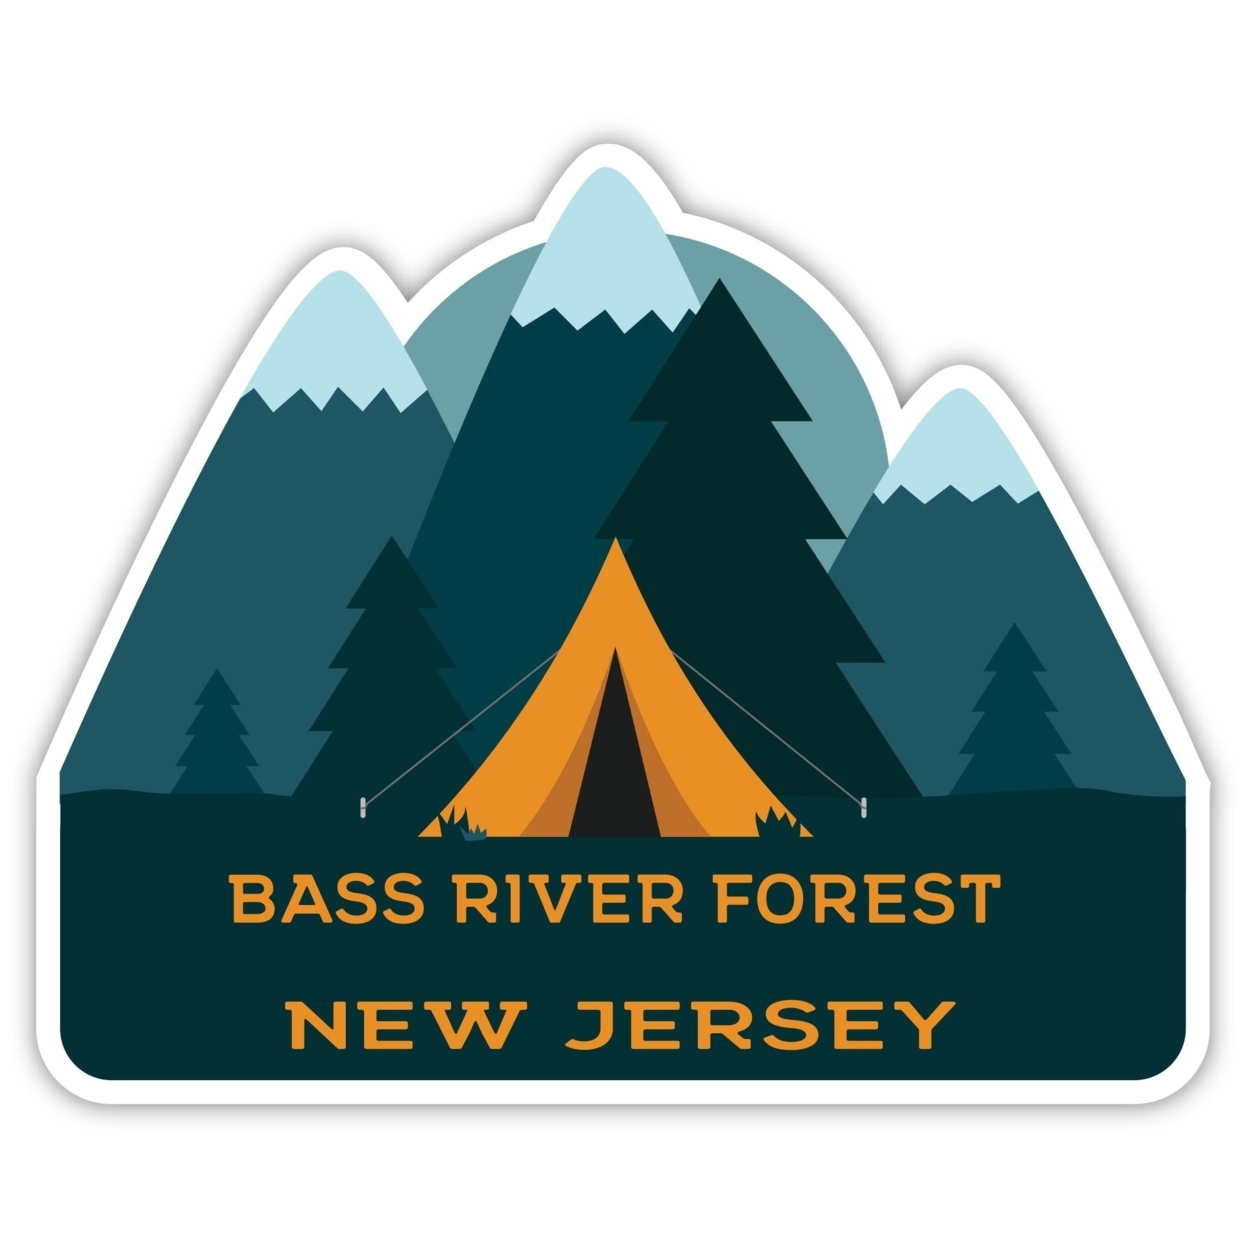 Bass River Forest New Jersey Souvenir Decorative Stickers (Choose Theme And Size) - 4-Pack, 2-Inch, Tent